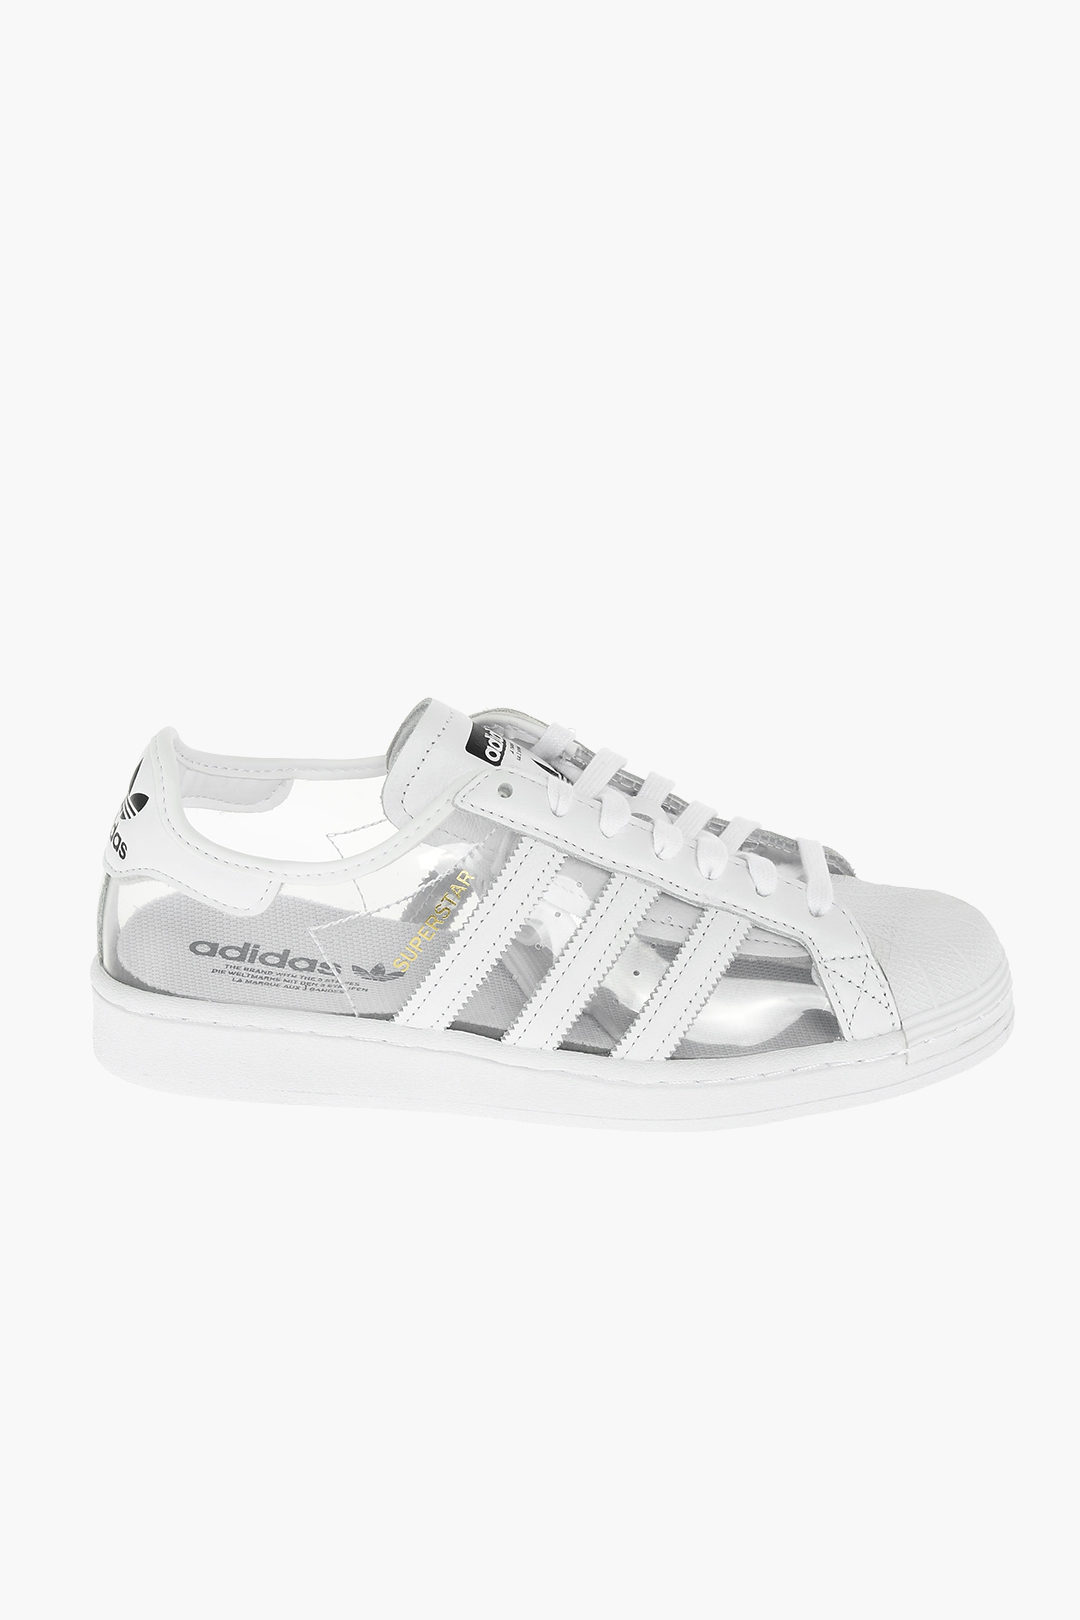 documentaire Integratie middag Adidas pvc SUPERSTAR sneakers with sheer upper men - Glamood Outlet